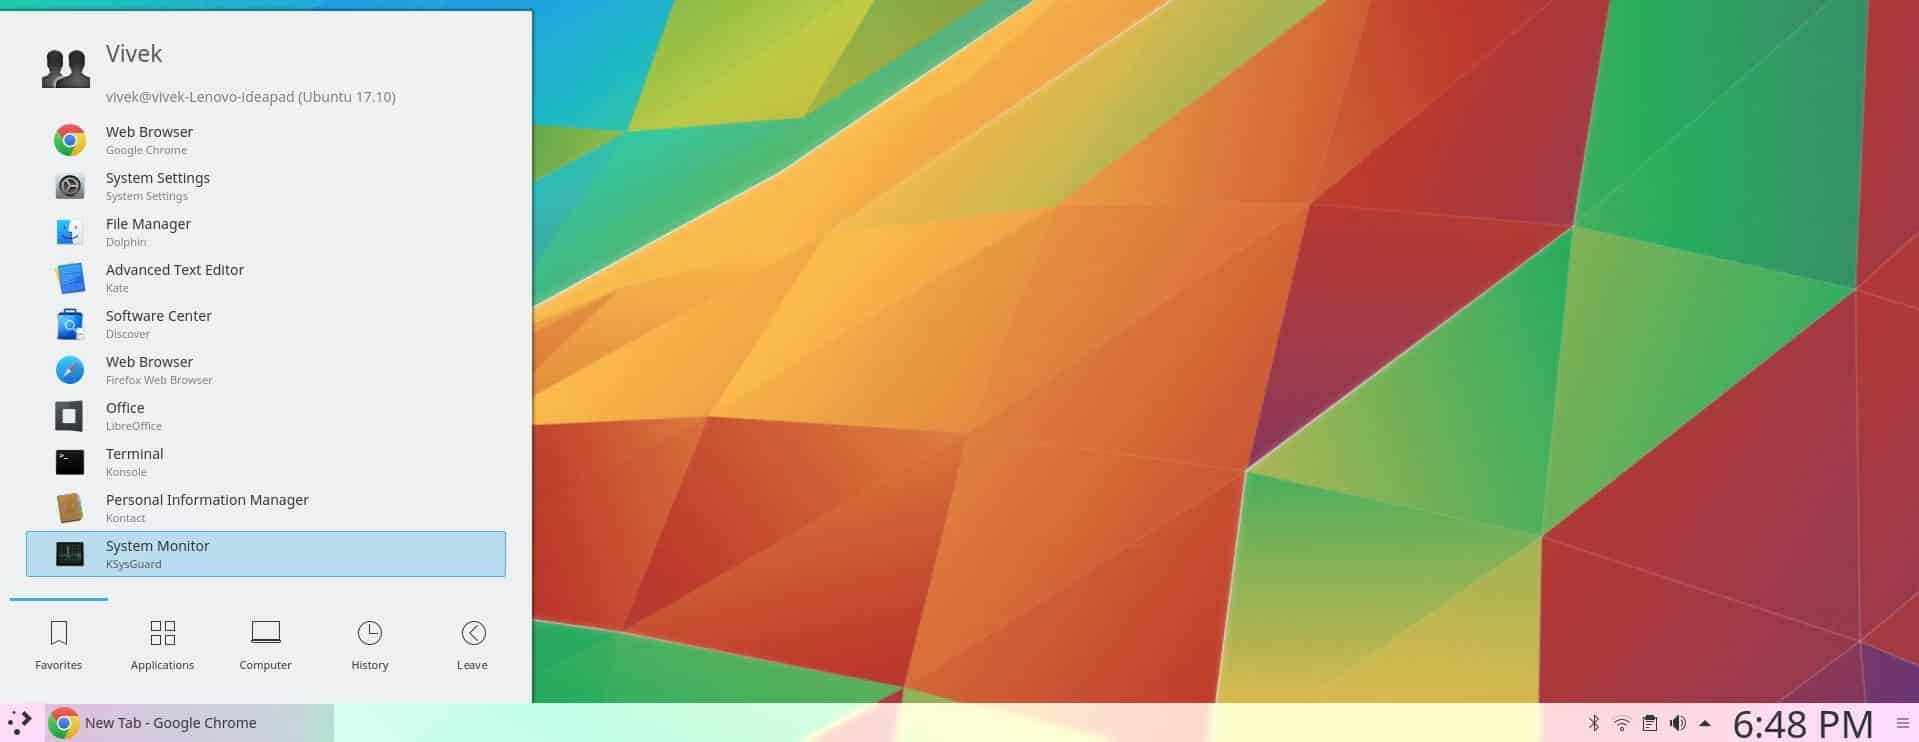 How To Get Started With KDE Plasma 5.11